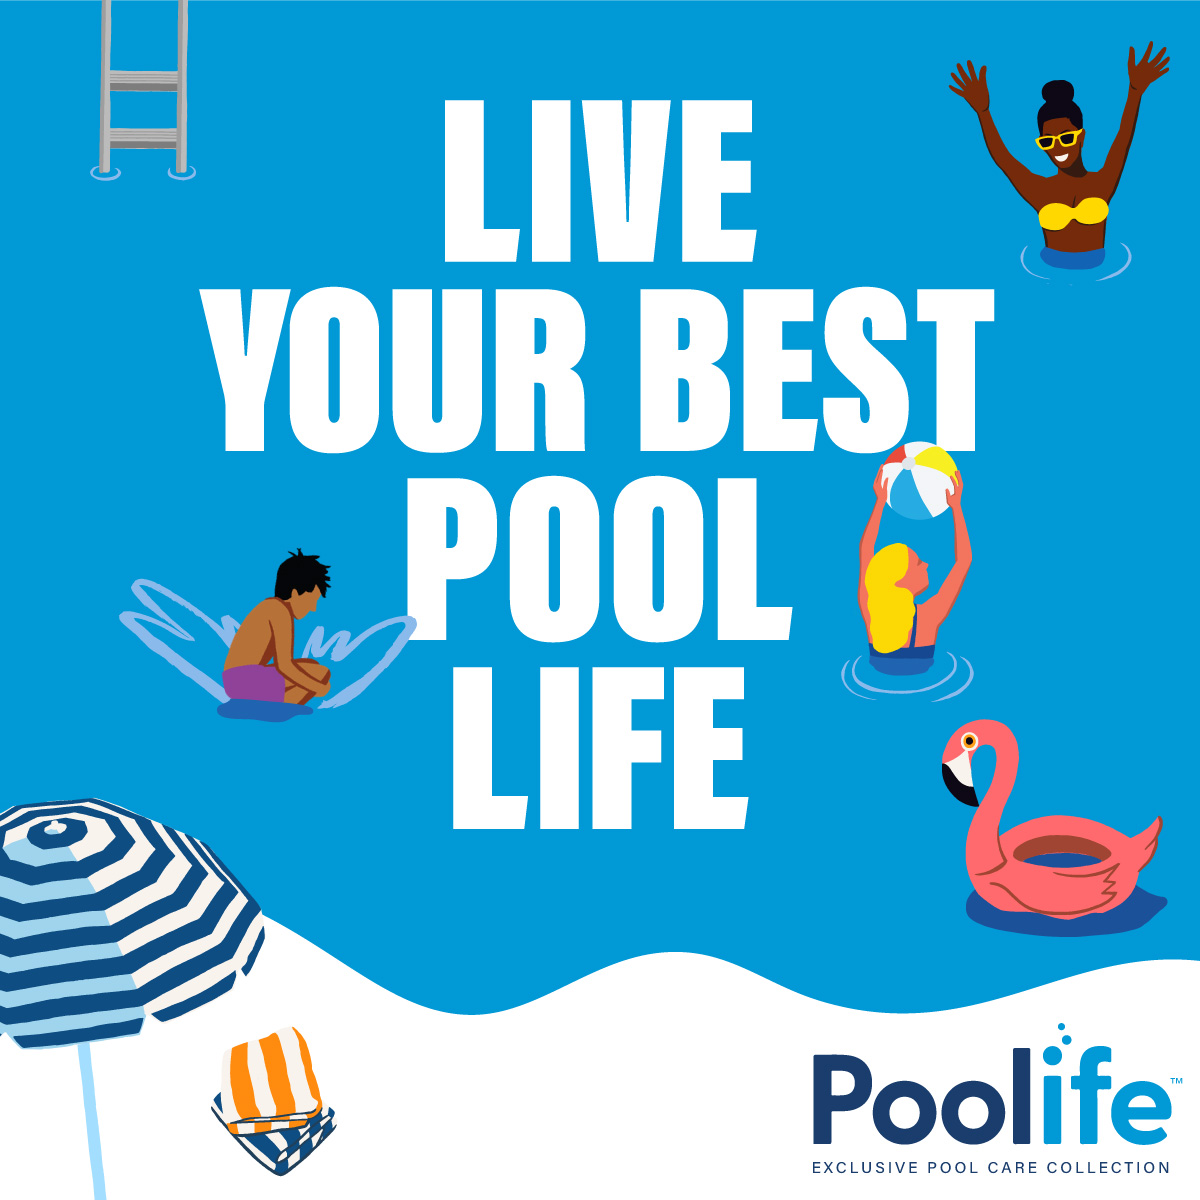 Pool Party icons with text reading: "Live your best pool life" featuring pink flamingo floaty